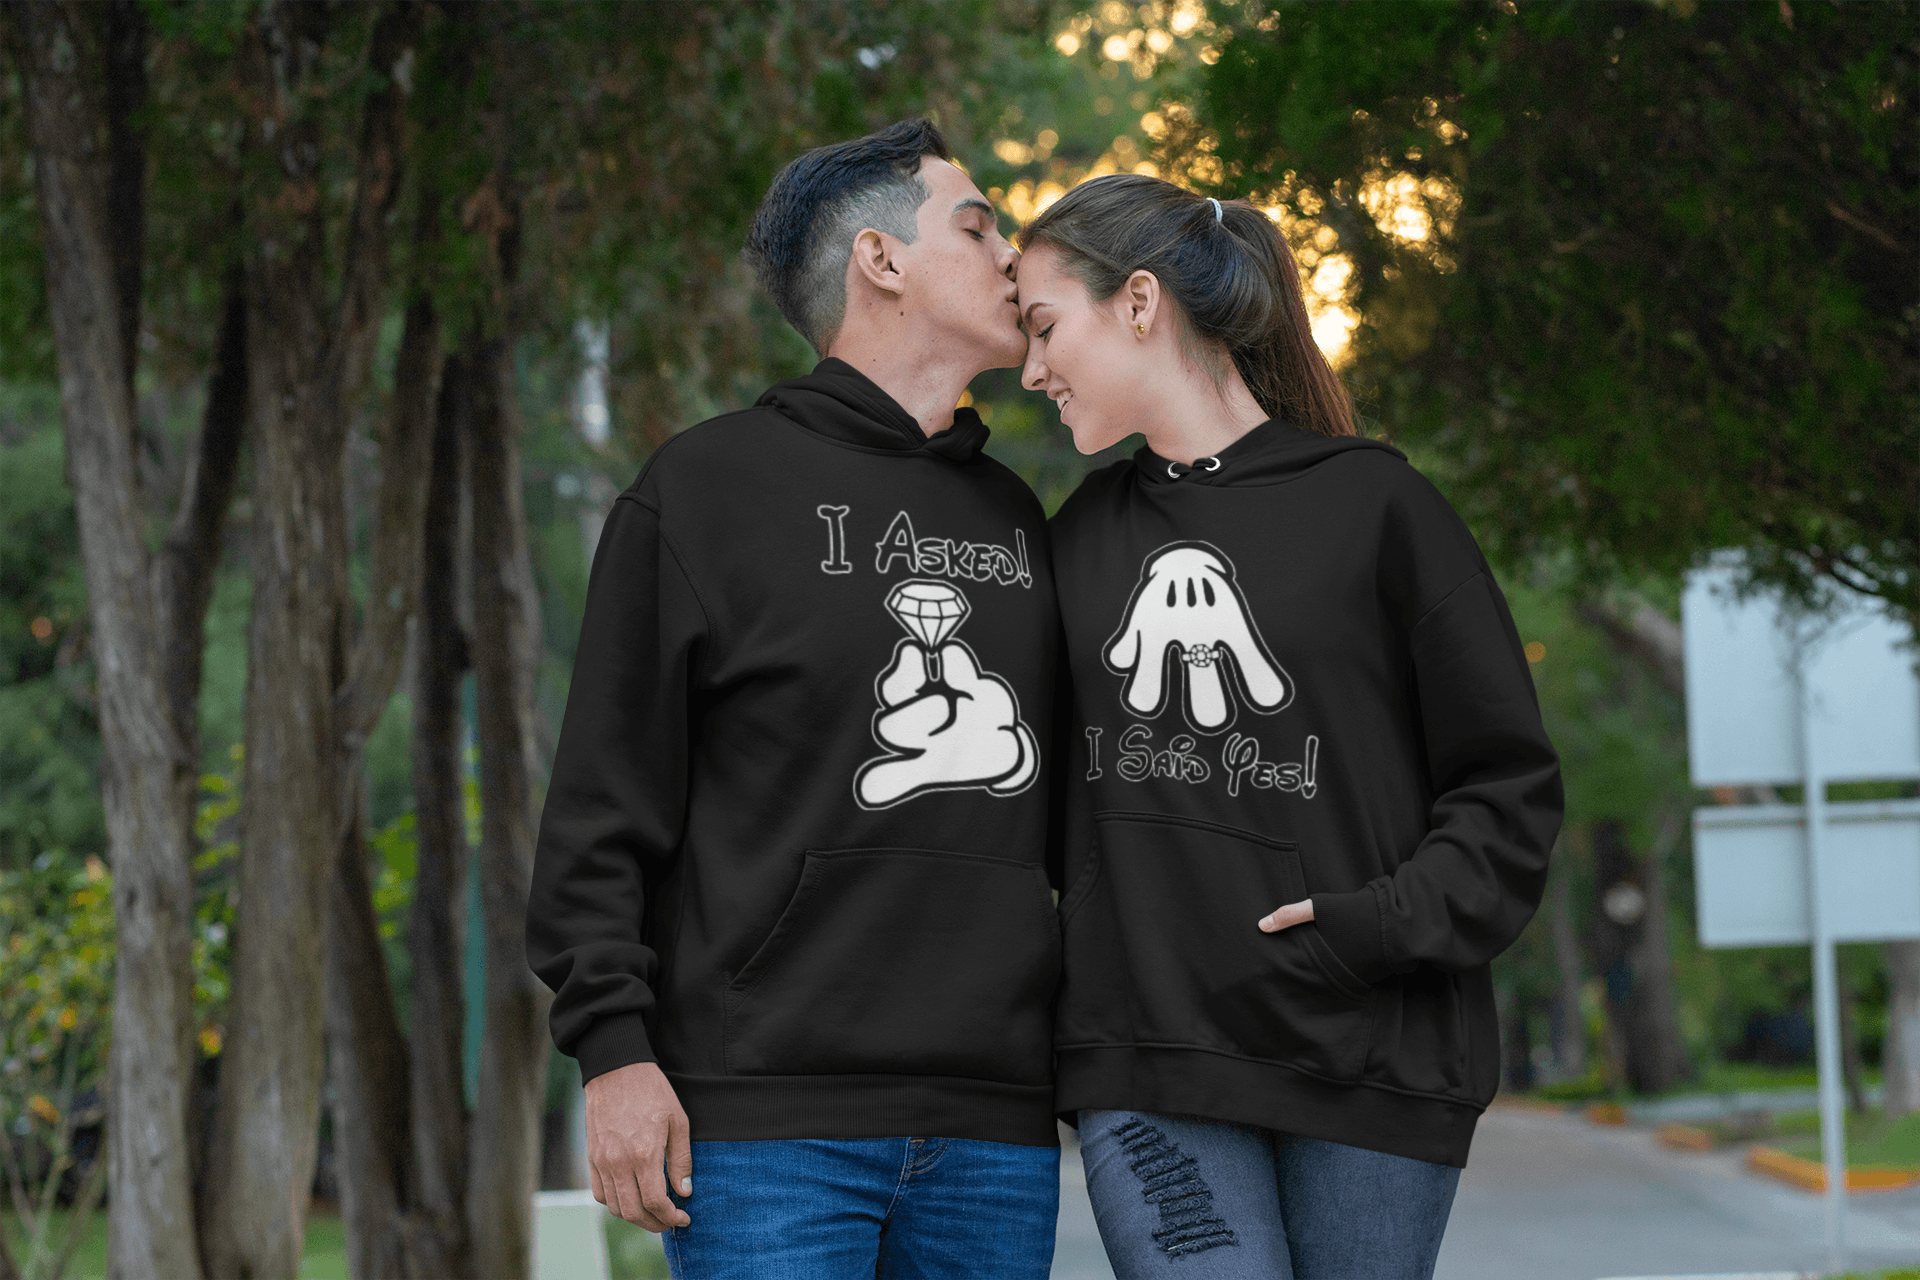 Relationship Hoodie Set I Asked/I Said Yes Midweight Cotton Blend Ultra Soft Pullovers - TopKoalaTee